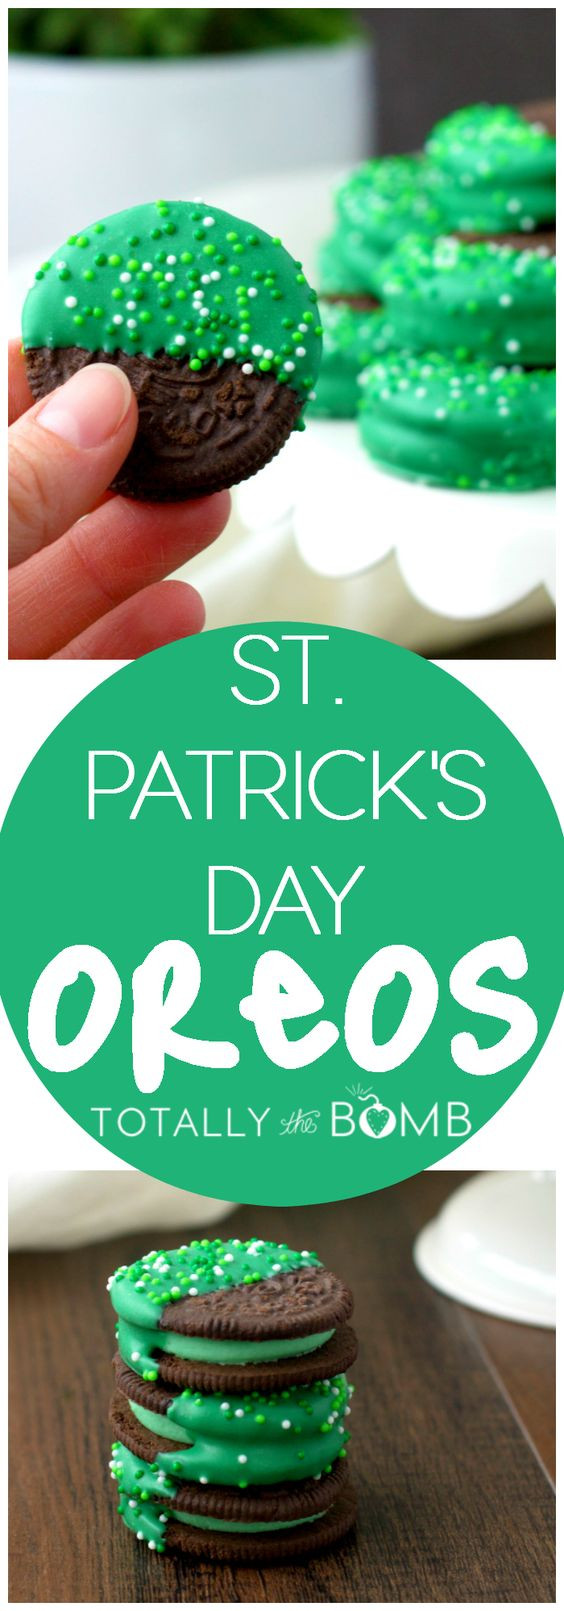 St Patrick Day Desserts Easy
 14 Popular Easy St Patrick’s Day Desserts and Treats